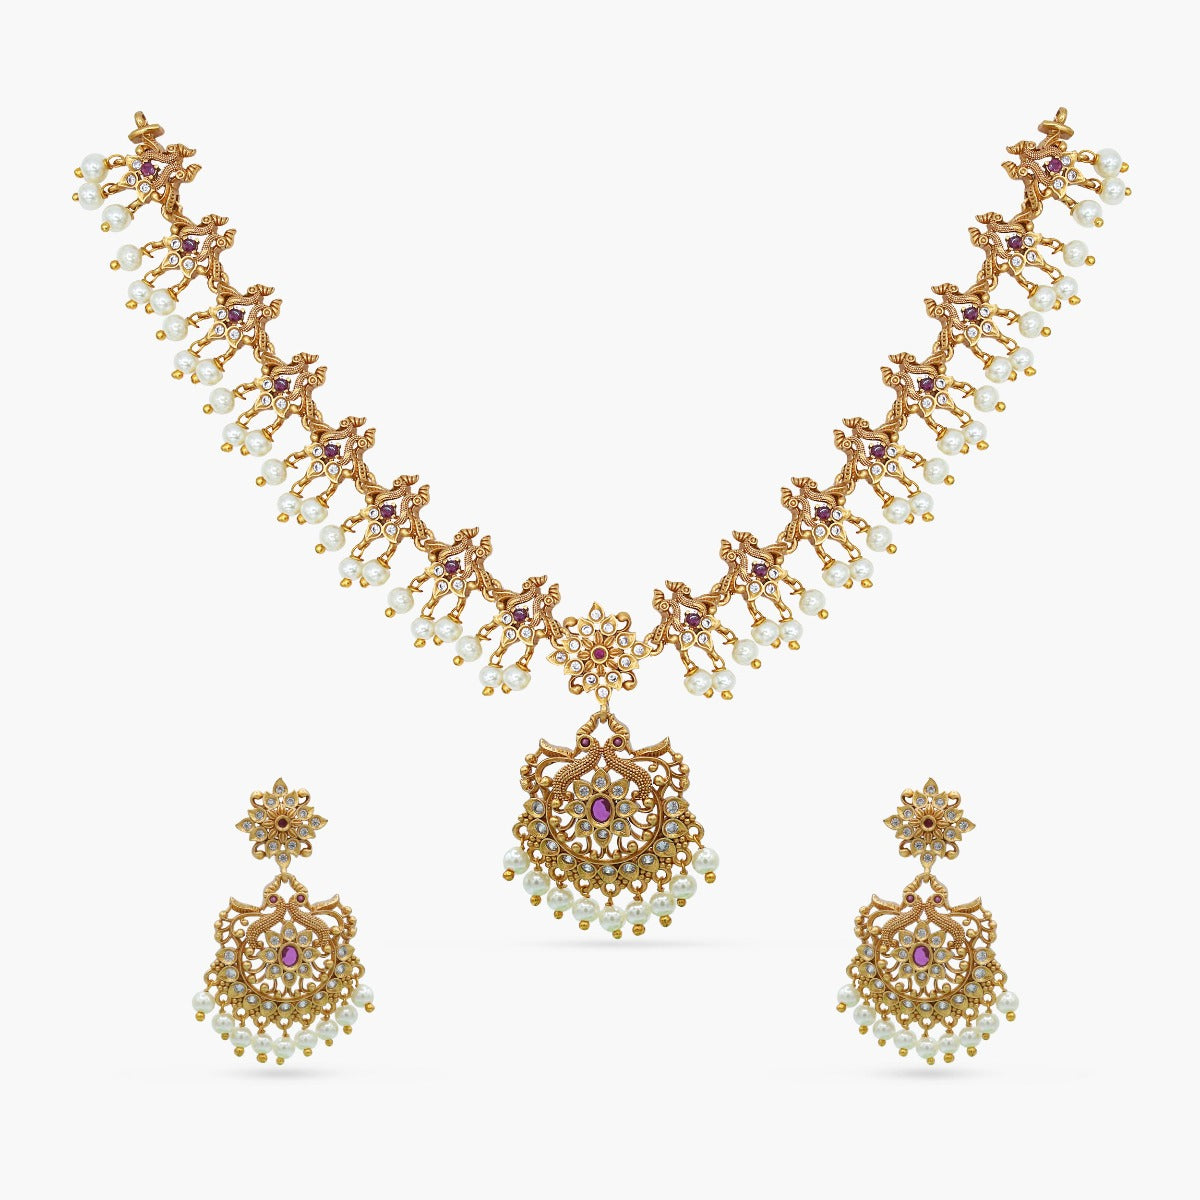 Buy TARINIKA Antique Gold Plated Ananya Long Necklace Set with Lakshmi Idol  Design - Jewelry Set for Women Perfect for Ethnic occasions, Traditional  Jewellery For Women